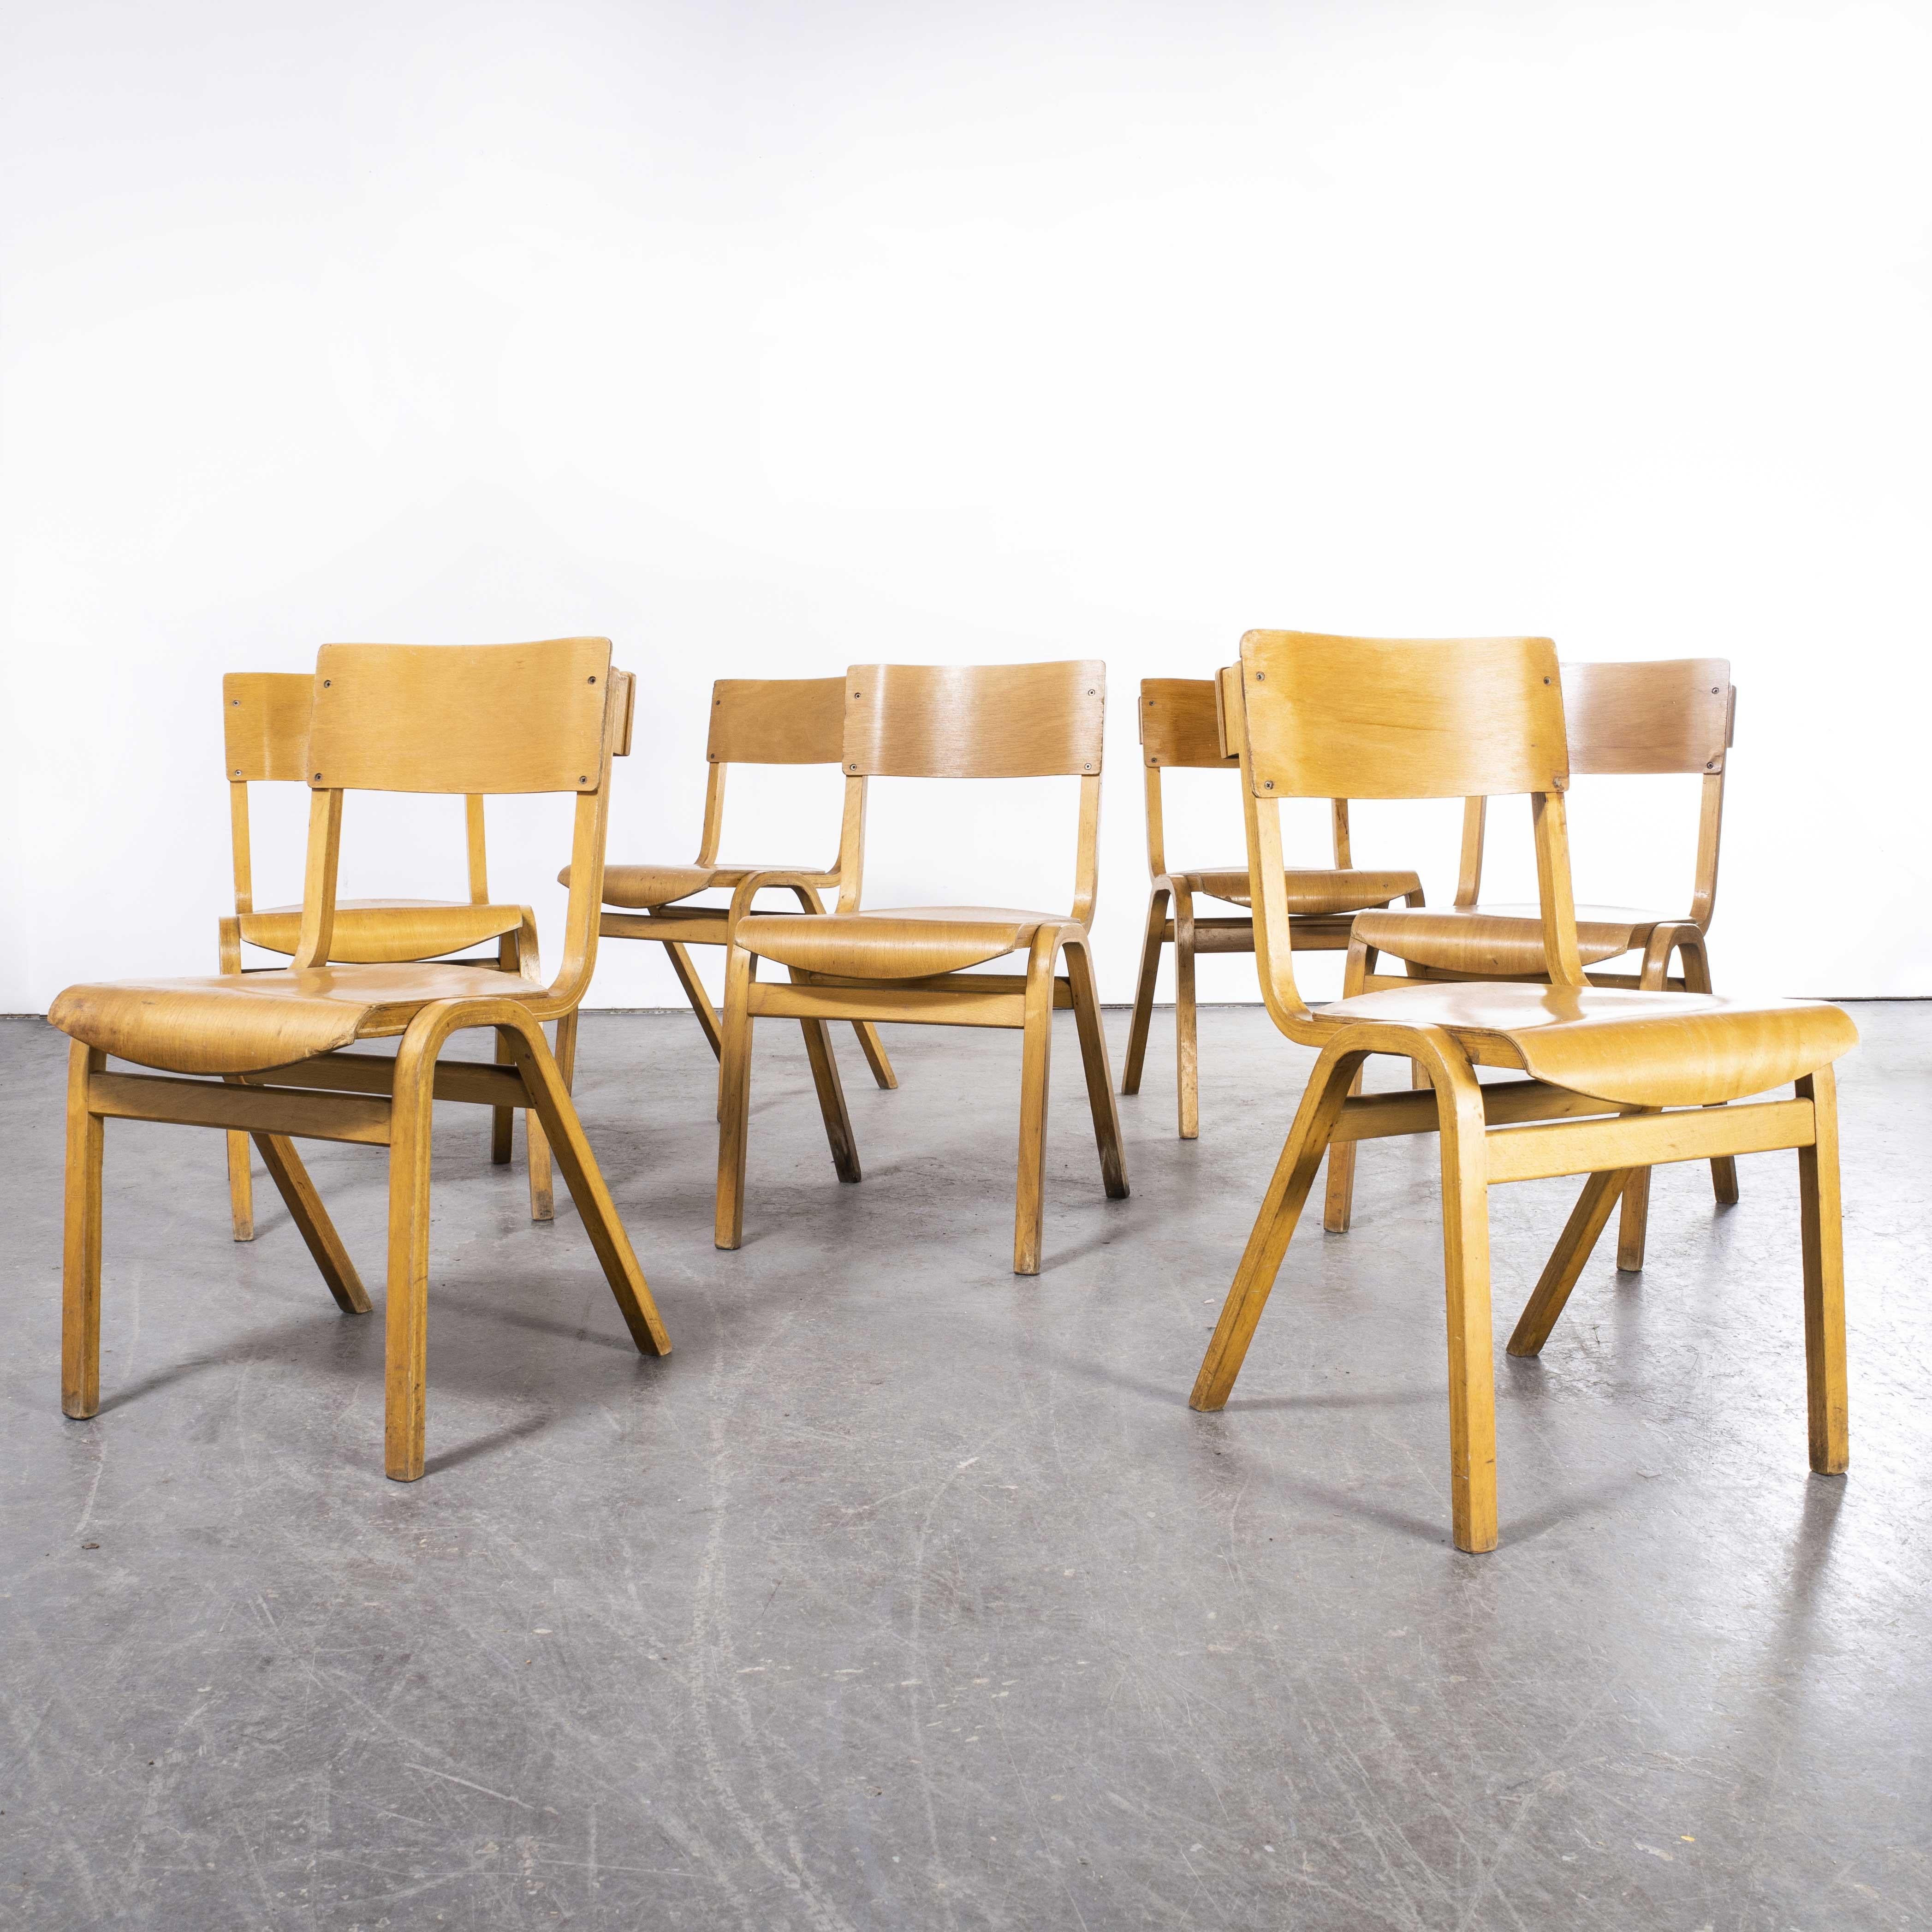 1950s stacking dining chairs By Lamstak – Set of Six
1950s stacking dining chairs By Lamstak – Set of Six. Lamstak was a large producer of chairs in the midcentury period. They pioneered making chairs using laminated bentwood for strength and these